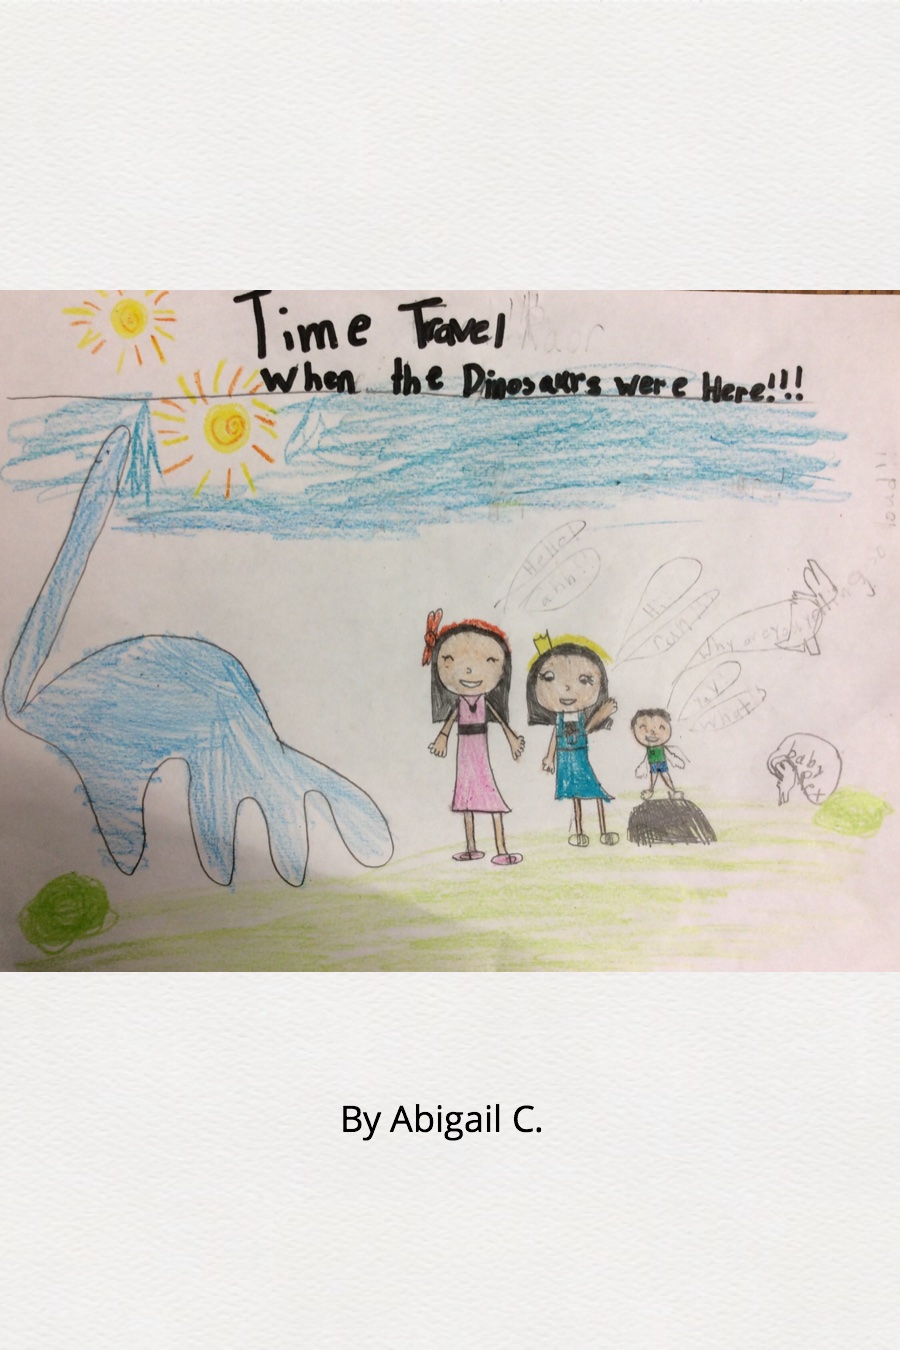 Time Travel When the Dinosaurs Were Here by Abigail C